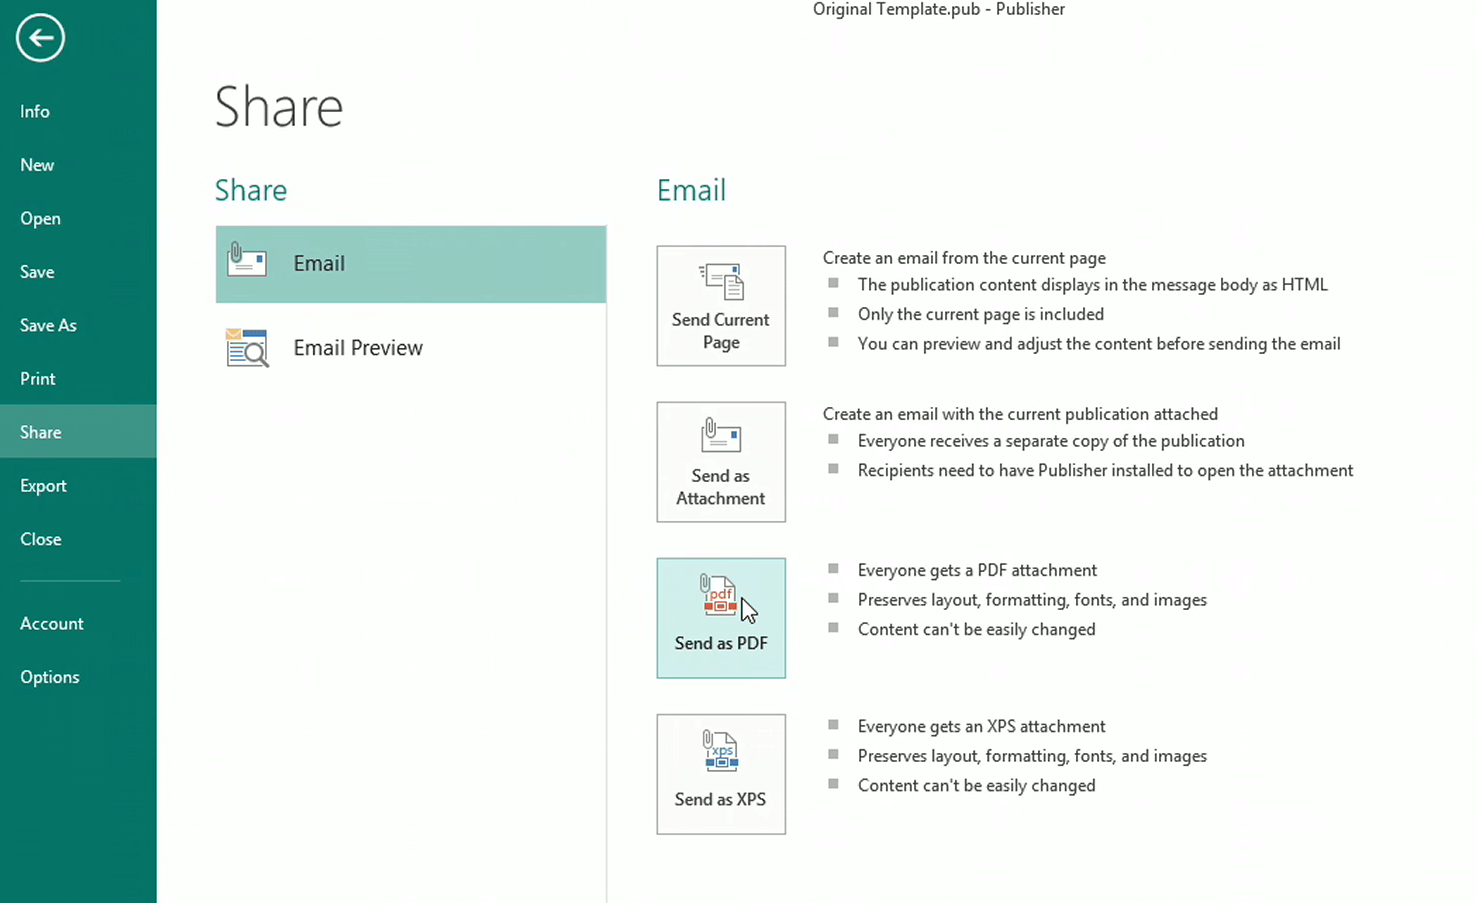 The Send as PDF button microsoft publisher won't send email